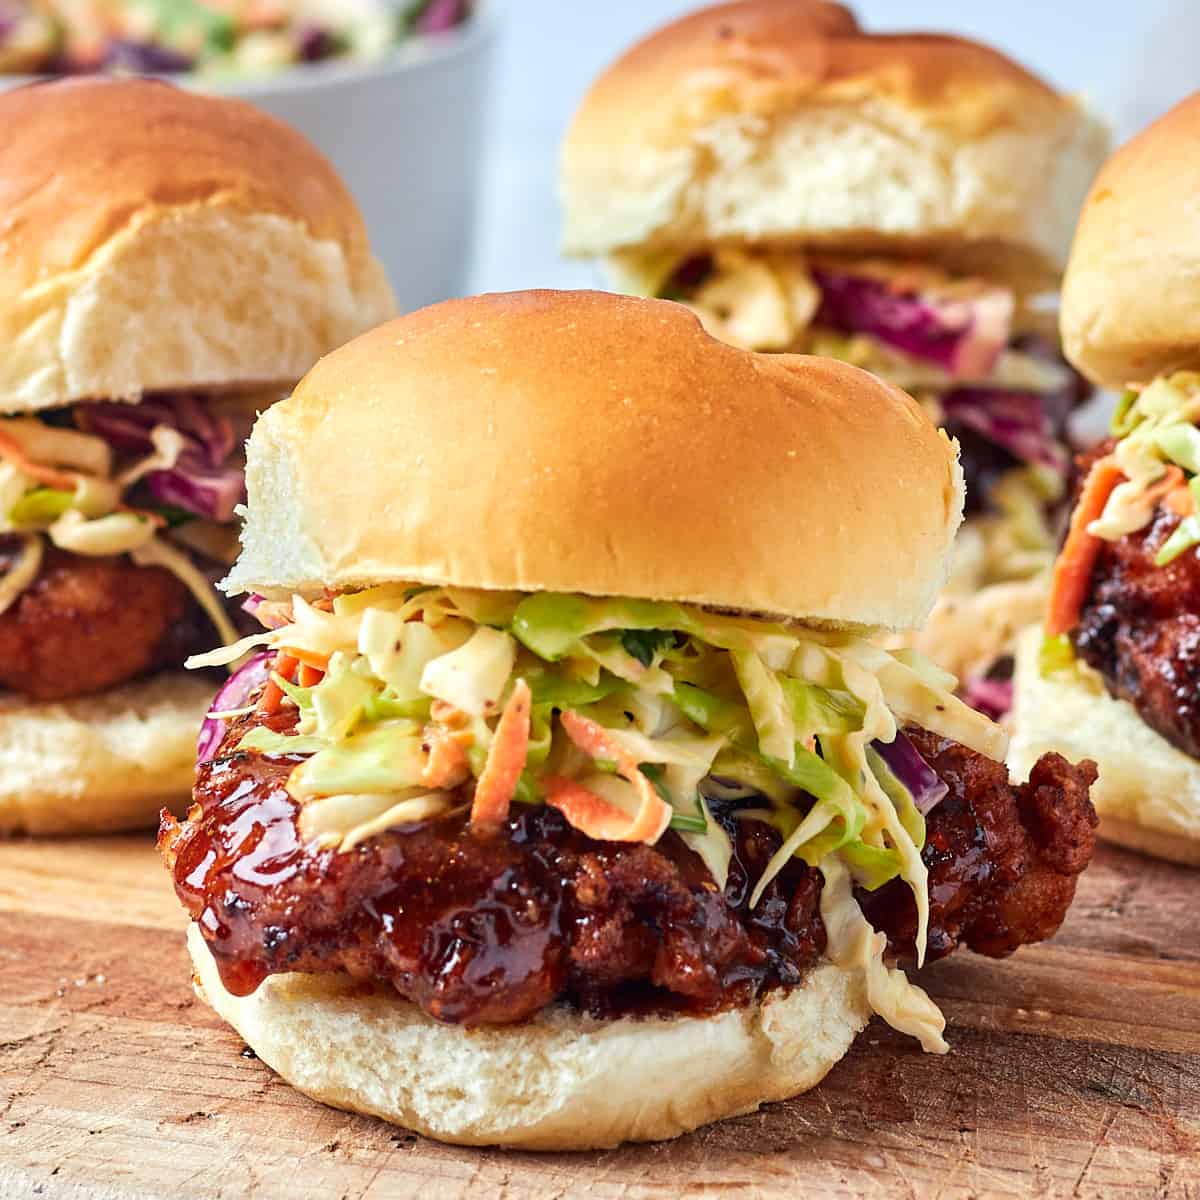 coleslaw as a topping on a chicken sandwich